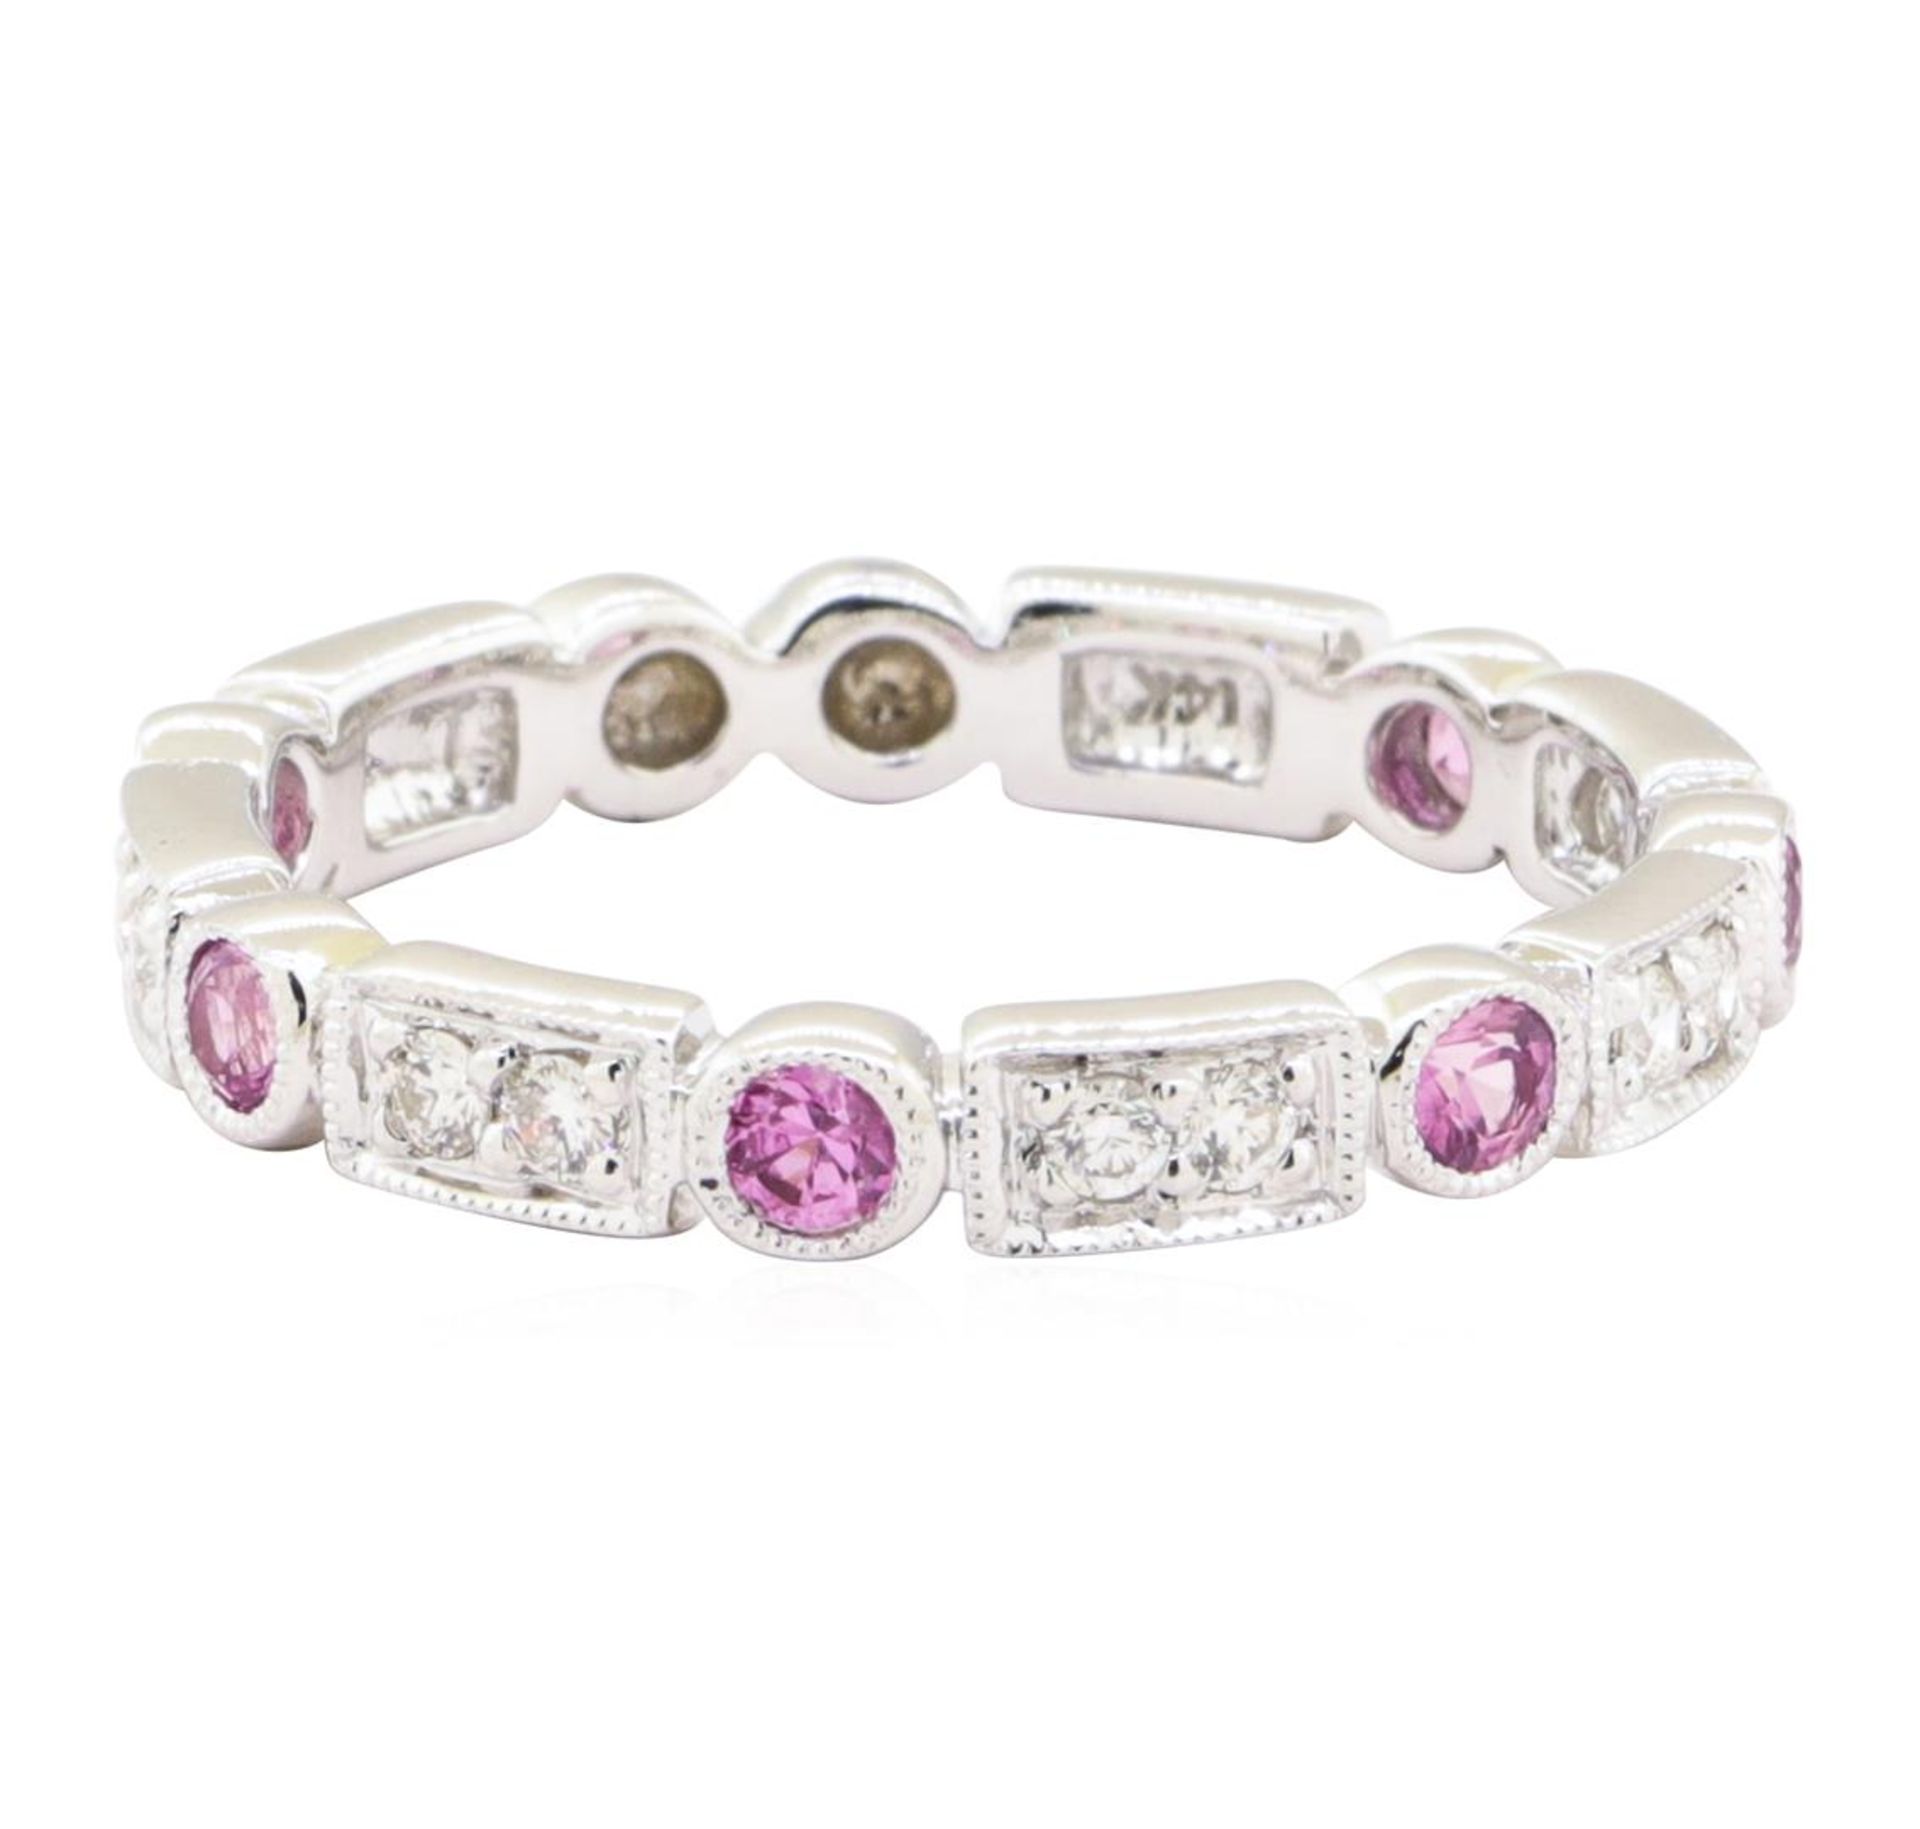 0.55 ctw Pink Sapphire and Diamond Ring - 14KT White Gold